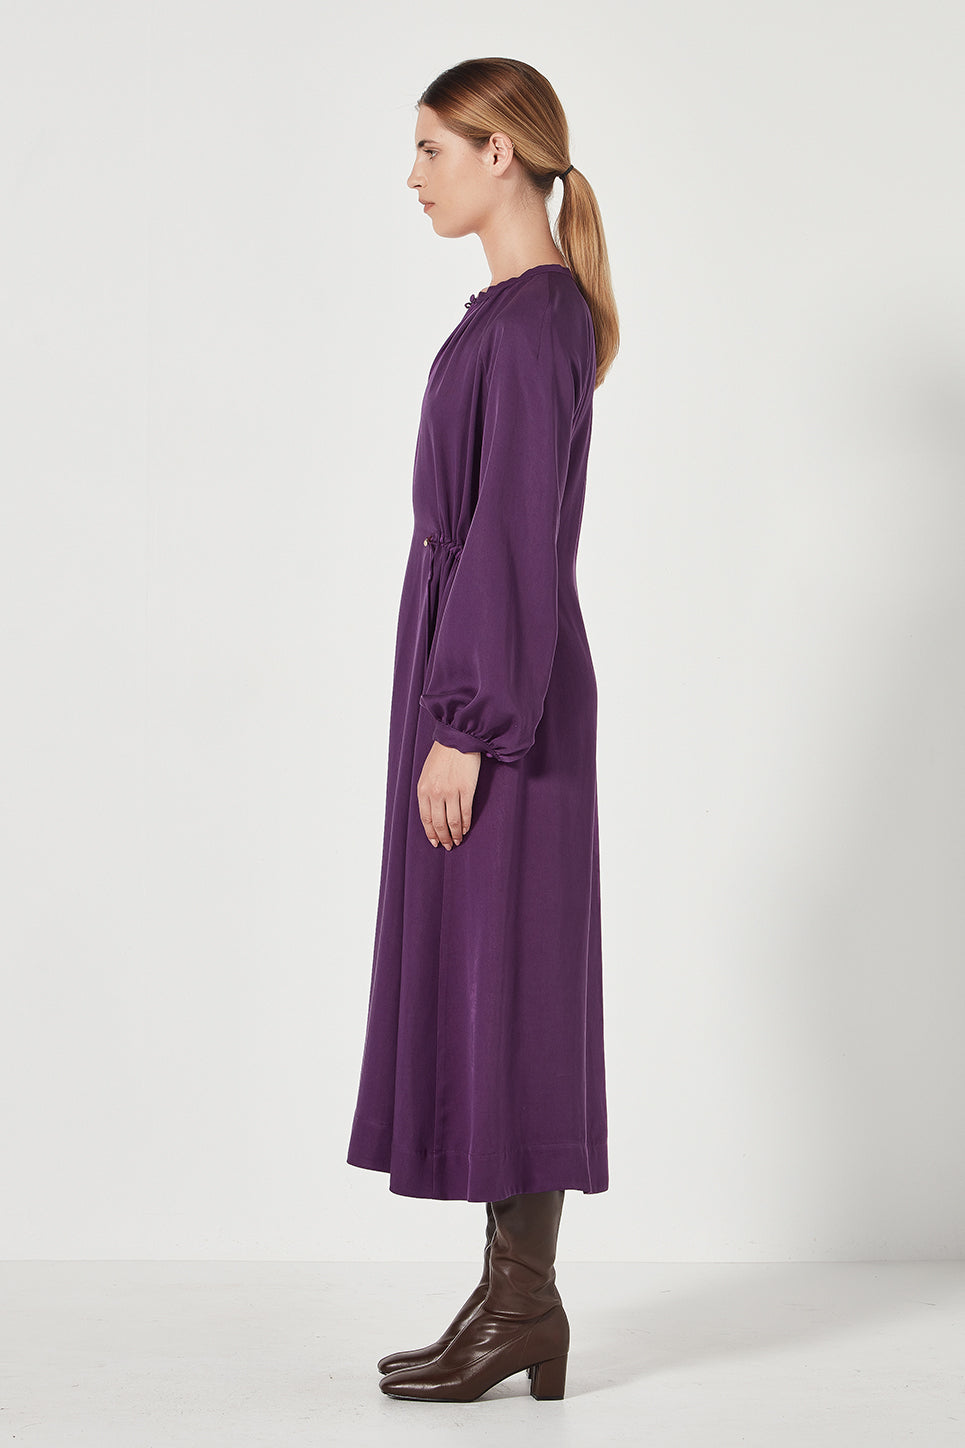 The Otto Dress in Amethyst